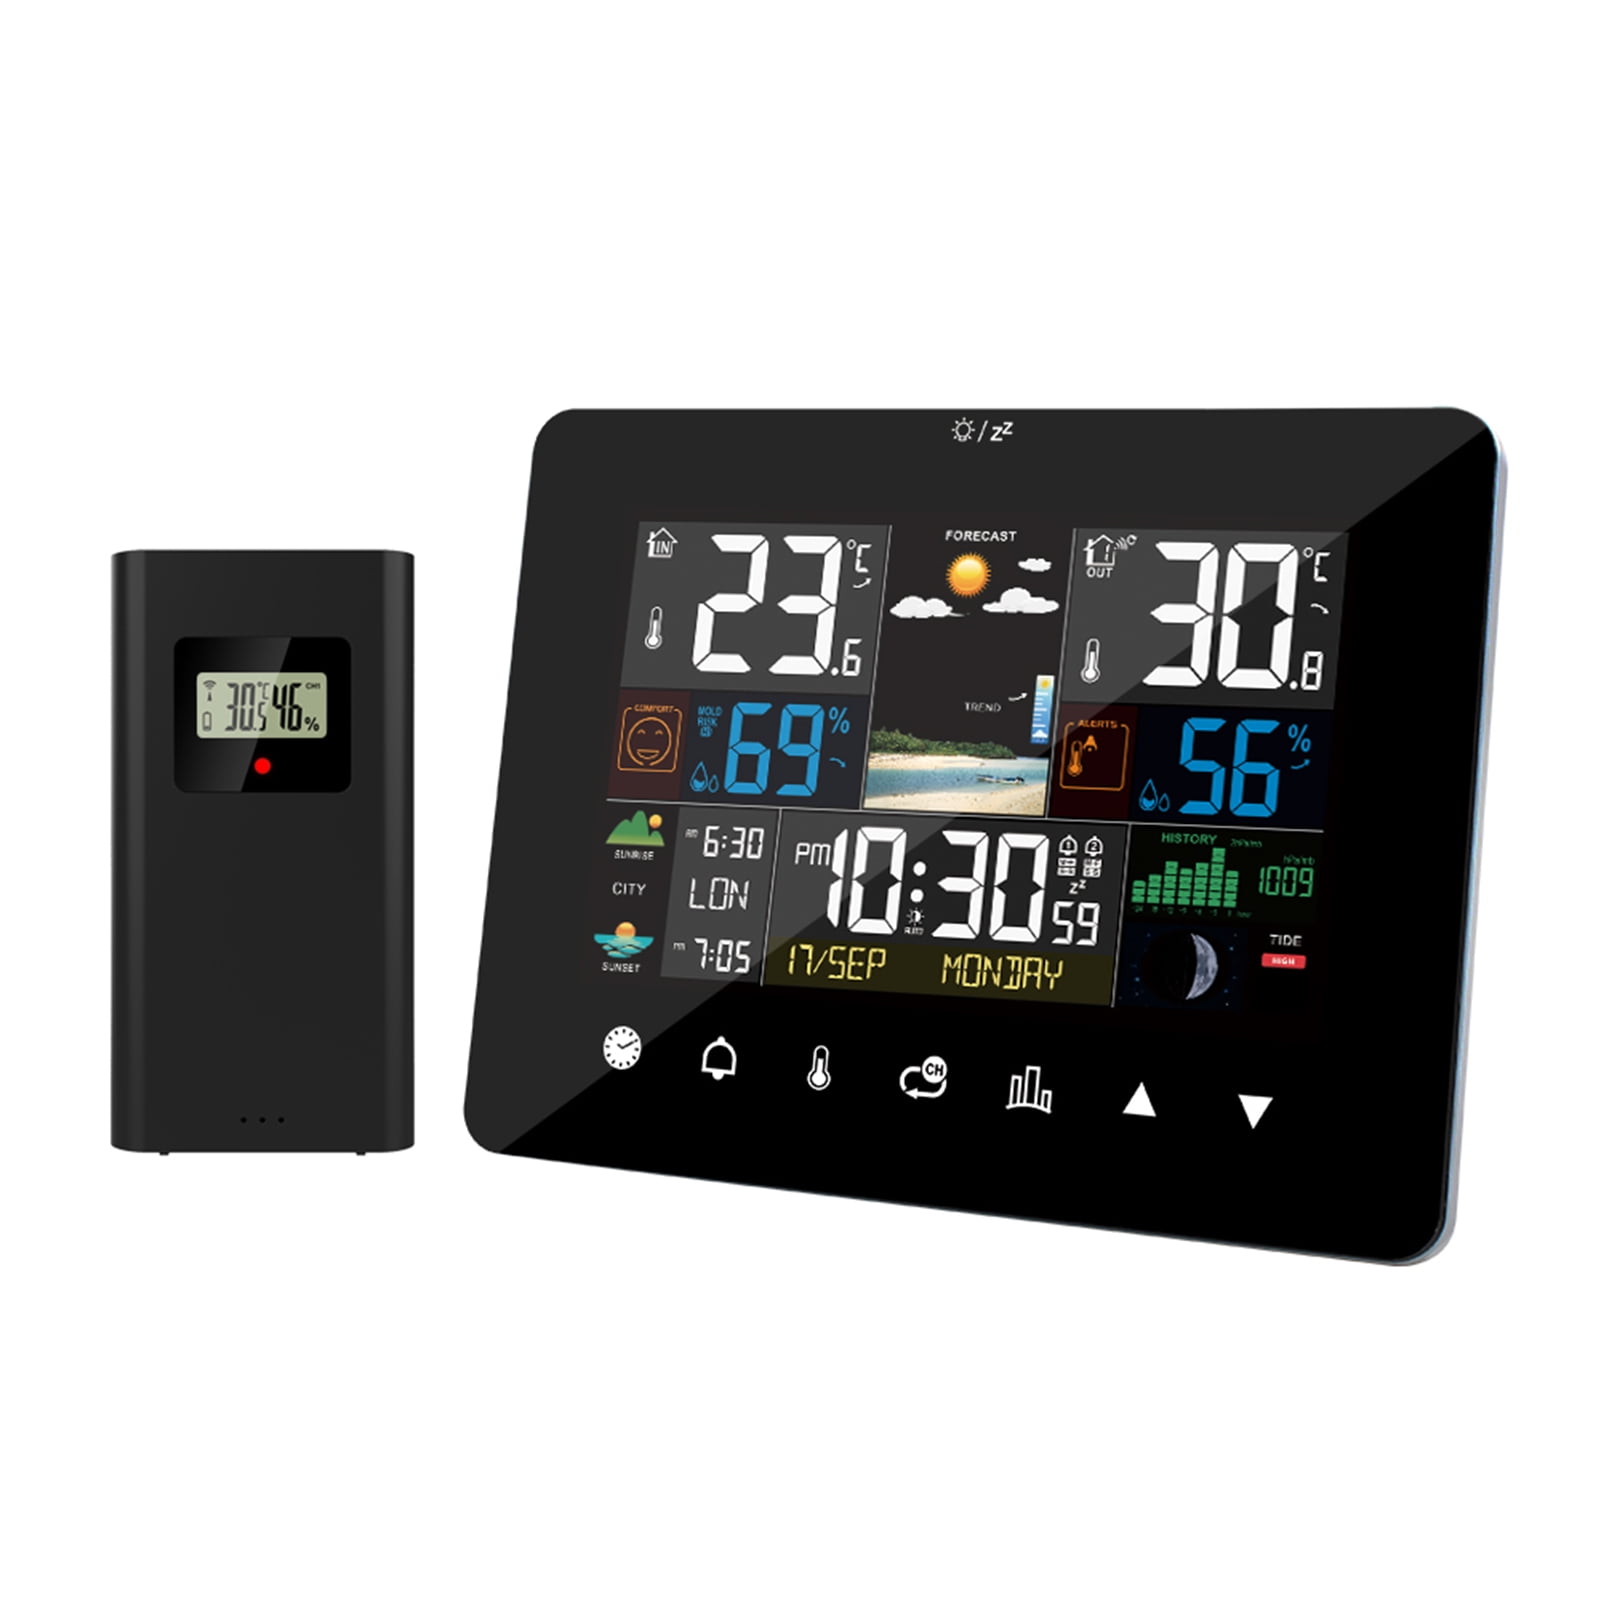 Sunrise and Sunset Weather Station Multi-function Alarm Hygrometer Touch Screen Operation with Wireless Outdoor Sensor, Men's, Size: Large, Black